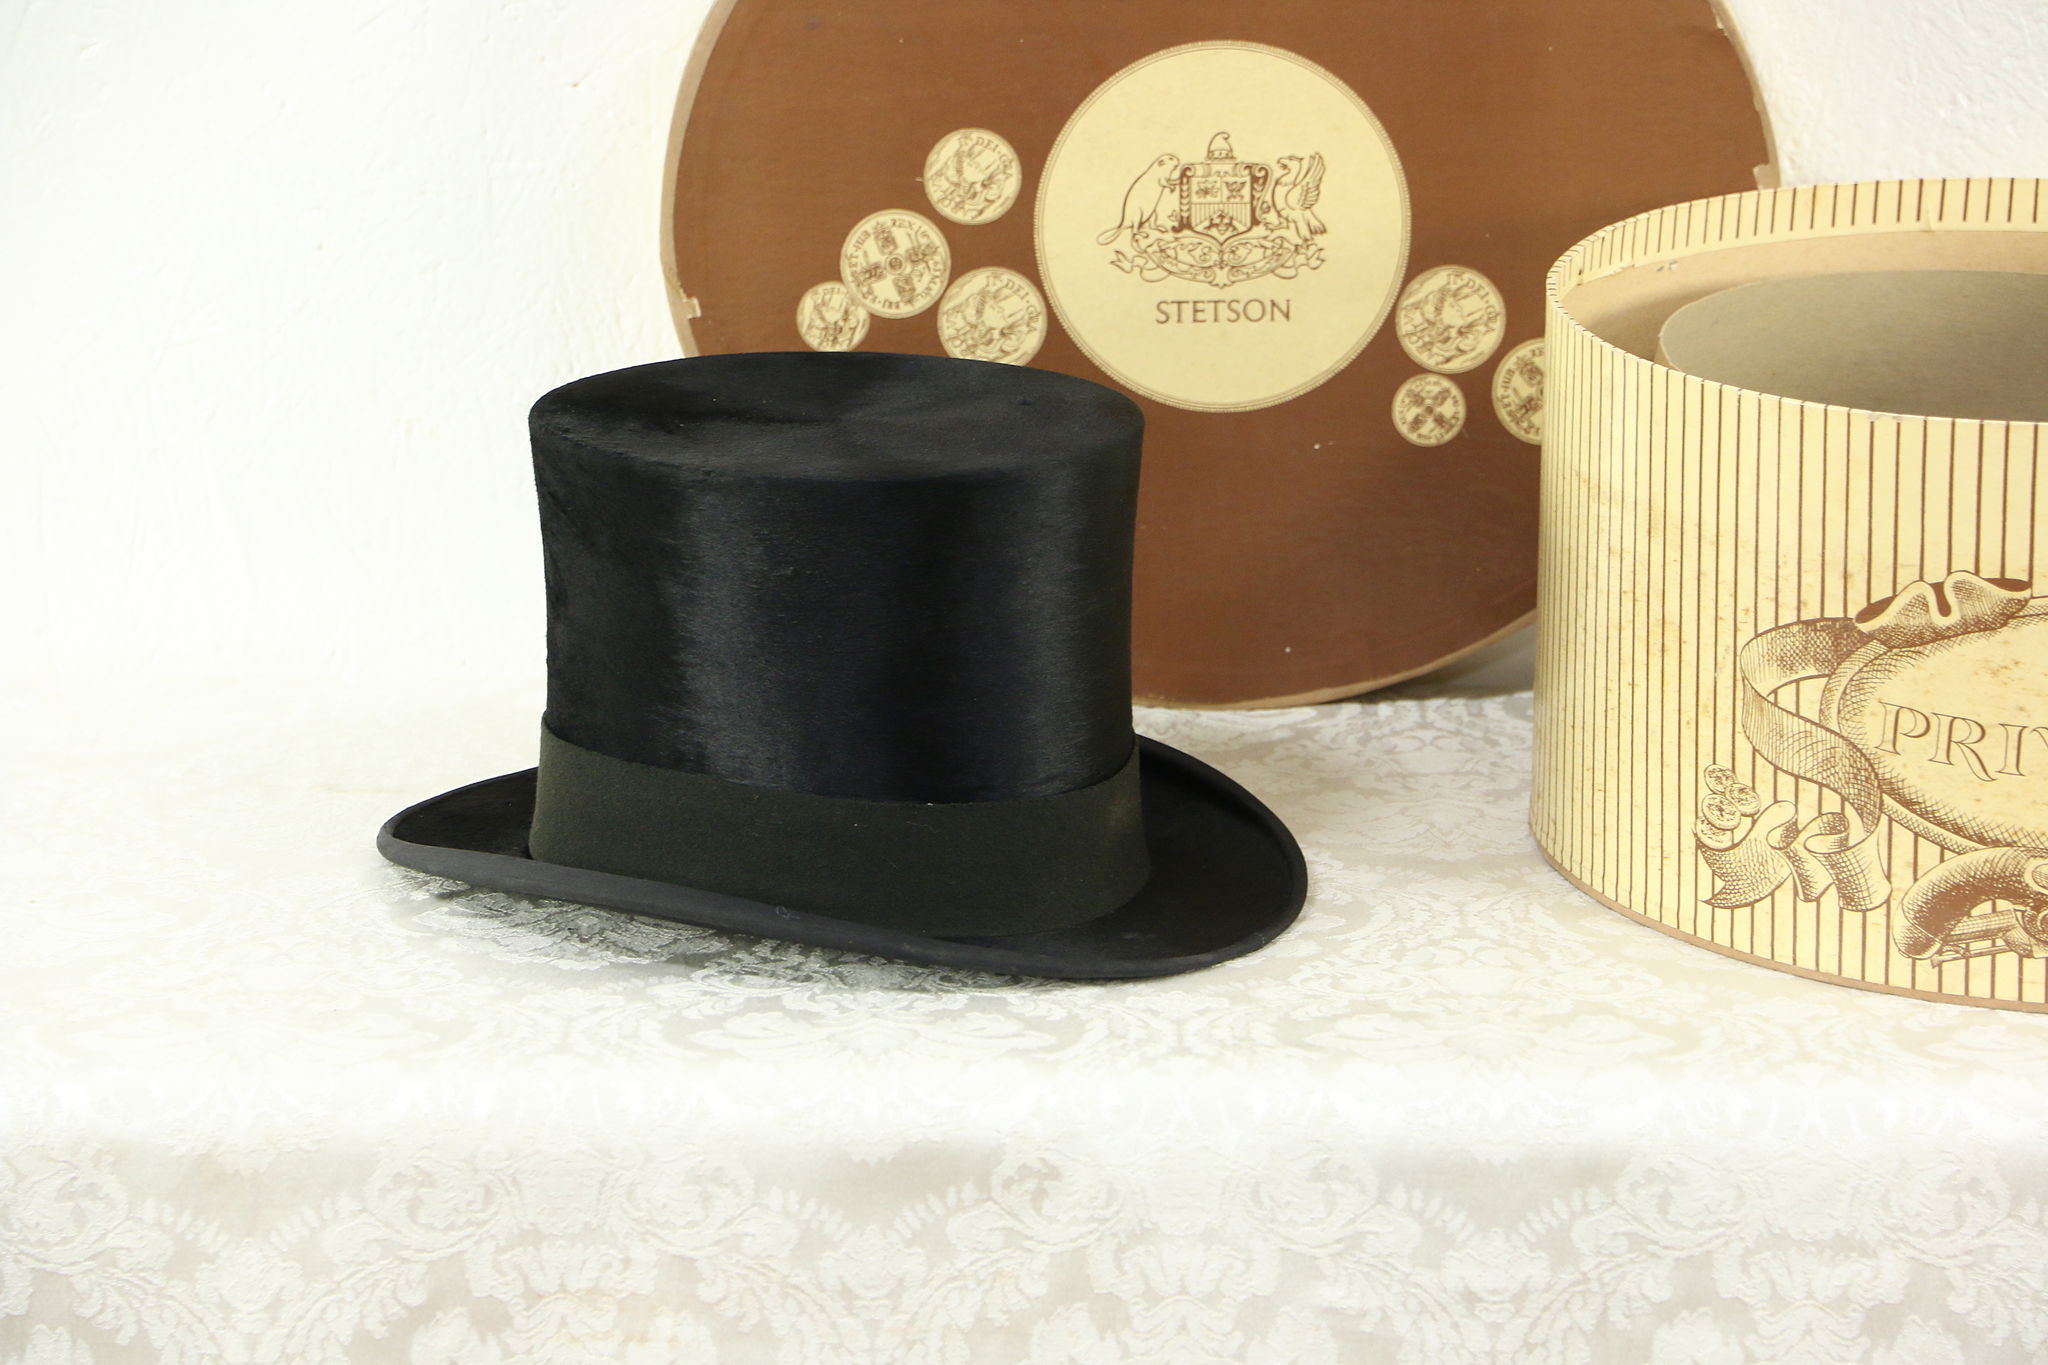 Antique Leather Top Hat Box, Luggage, French Silk Top Hat Inside. Coll –  Antiques & Uncommon Treasure